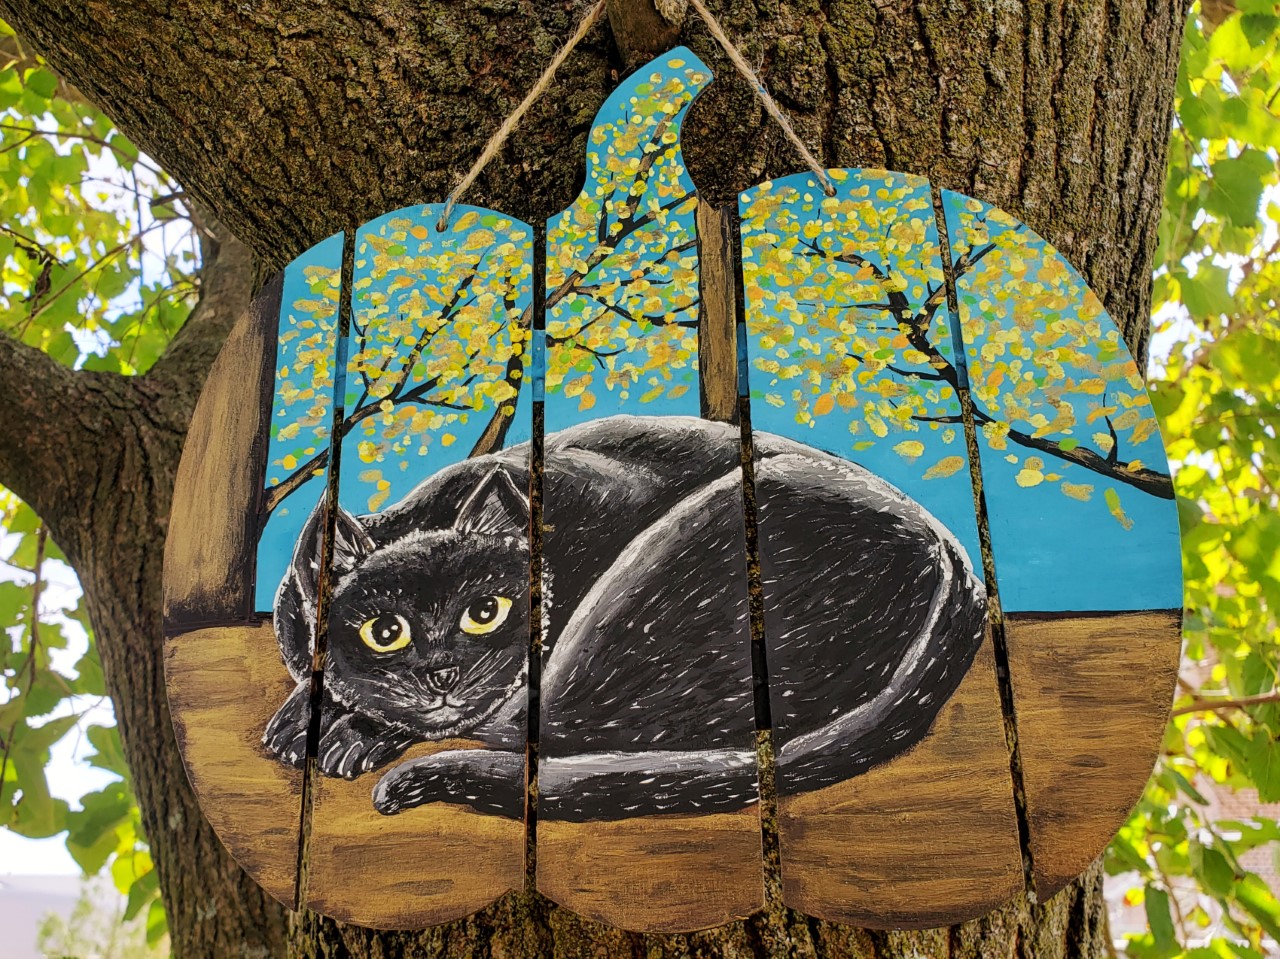 a wood plank sign shaped like a pumpkin with a painted cat on it